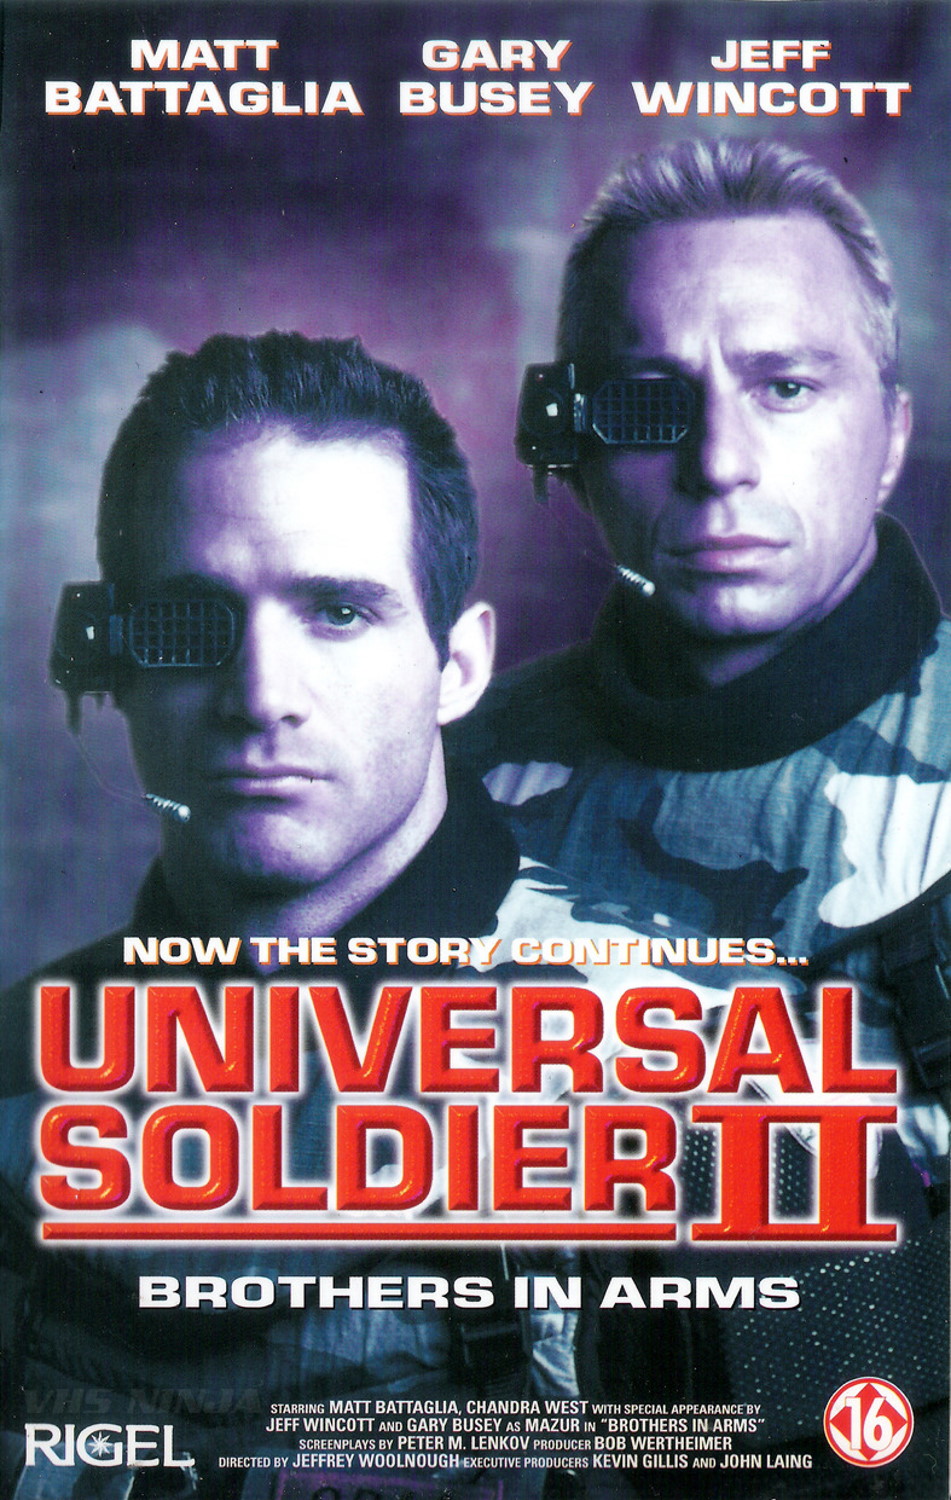 Universal Soldier II: Brothers in Arms (1998) Poster